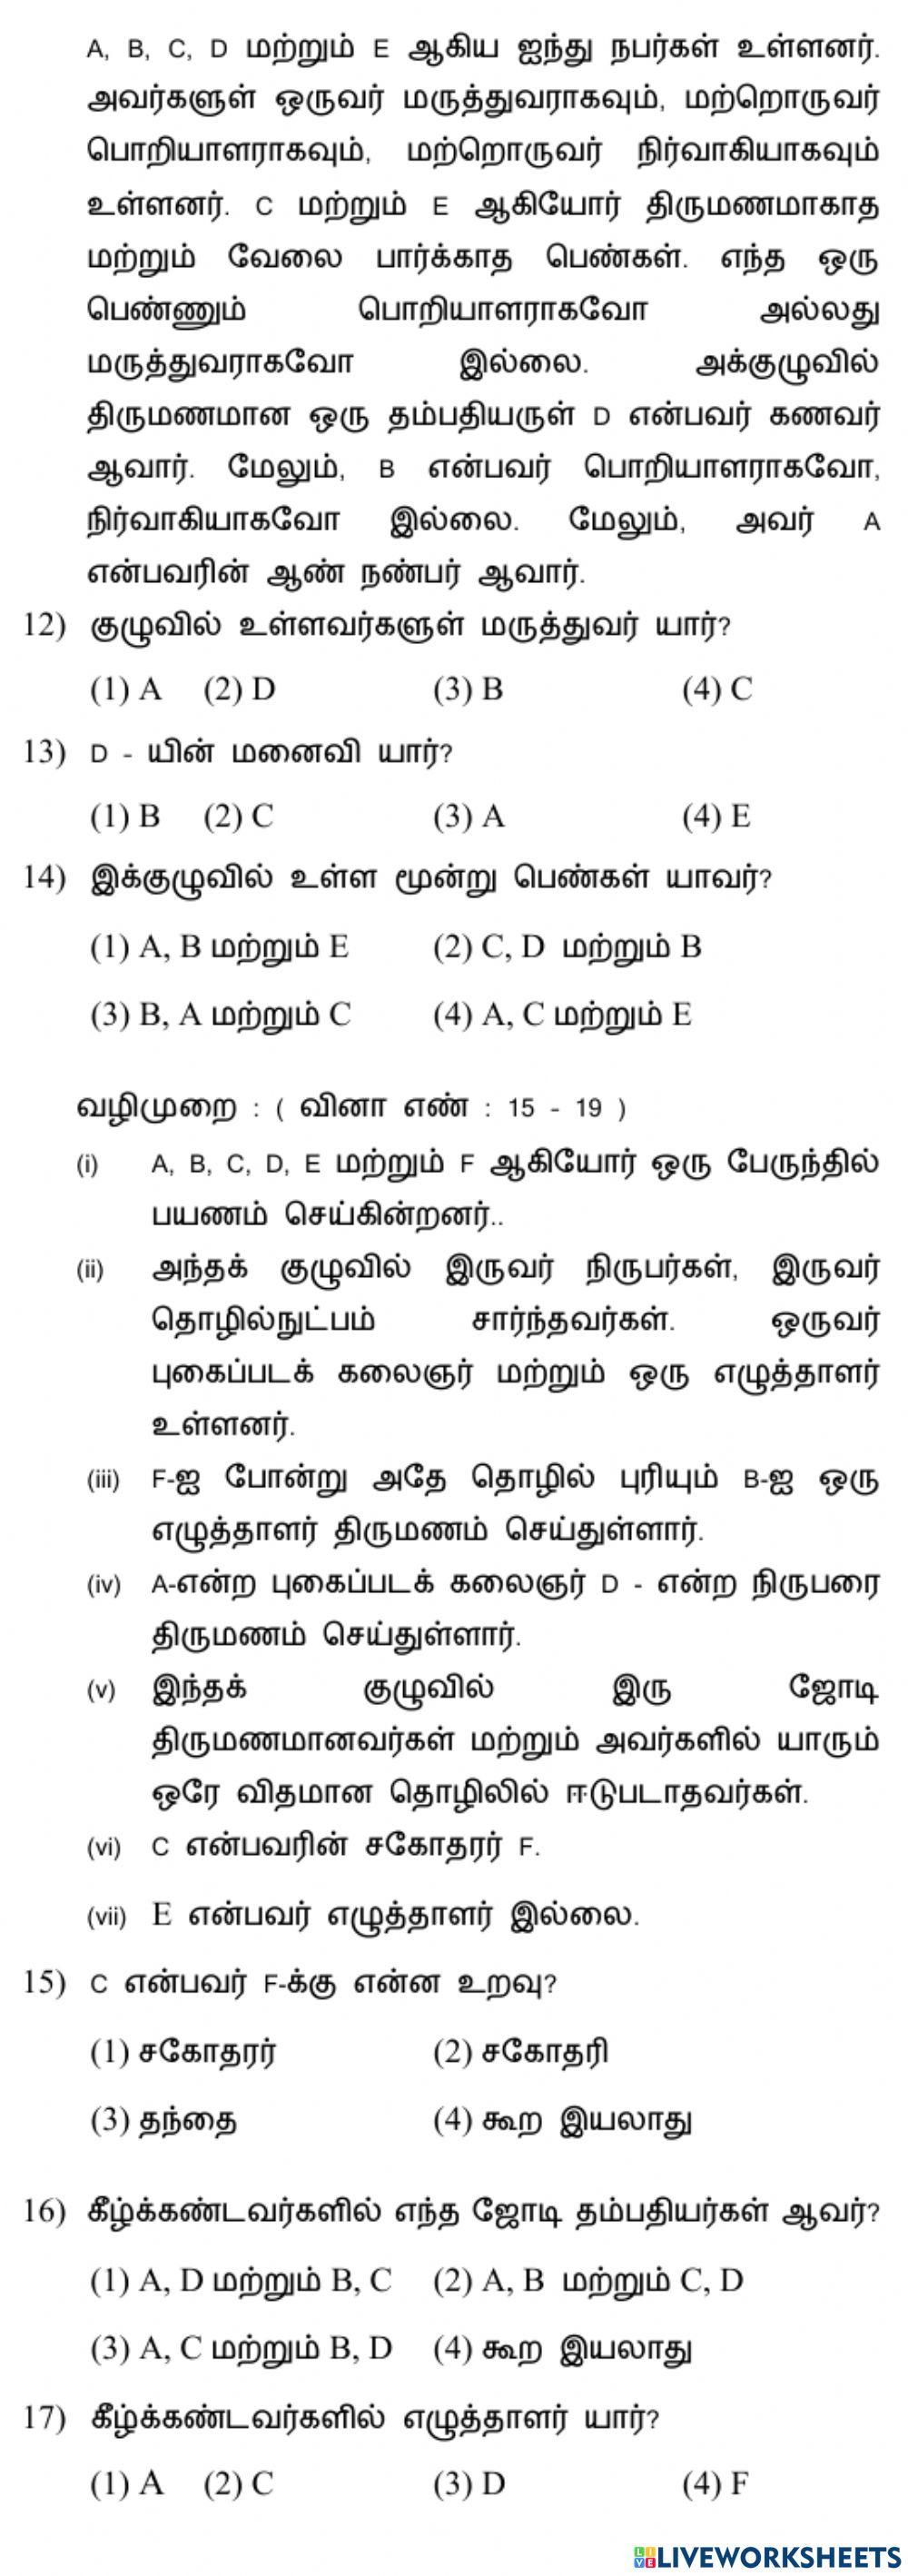 Situation related problems - Common